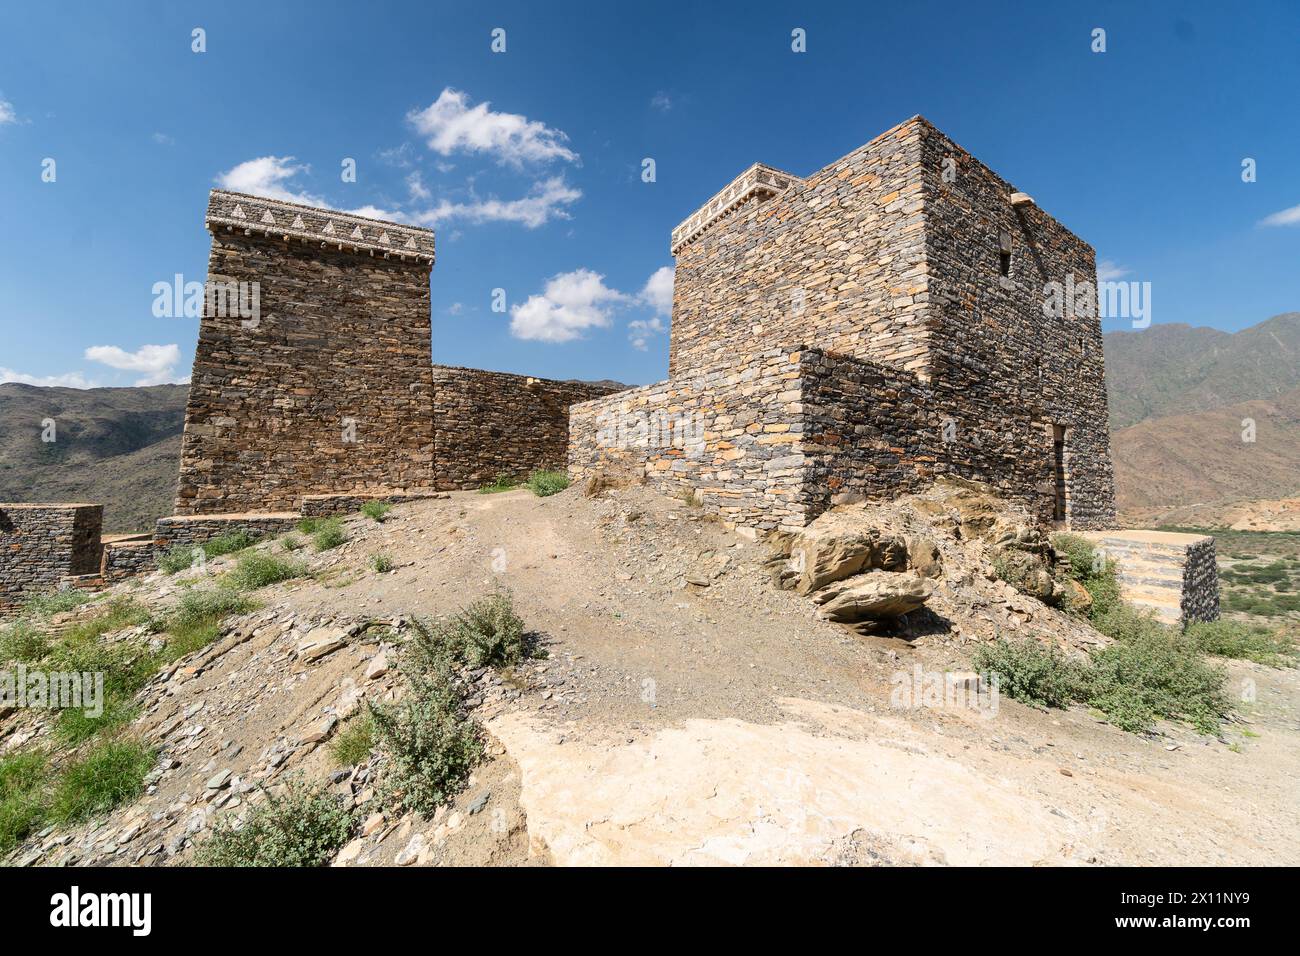 Al-Bahah, Saudi Arabia: Exterior view of the Thee Ain ancient village, known as the marble village, near Jeddah in Saudi Arabia on a hot sunny day. Stock Photo